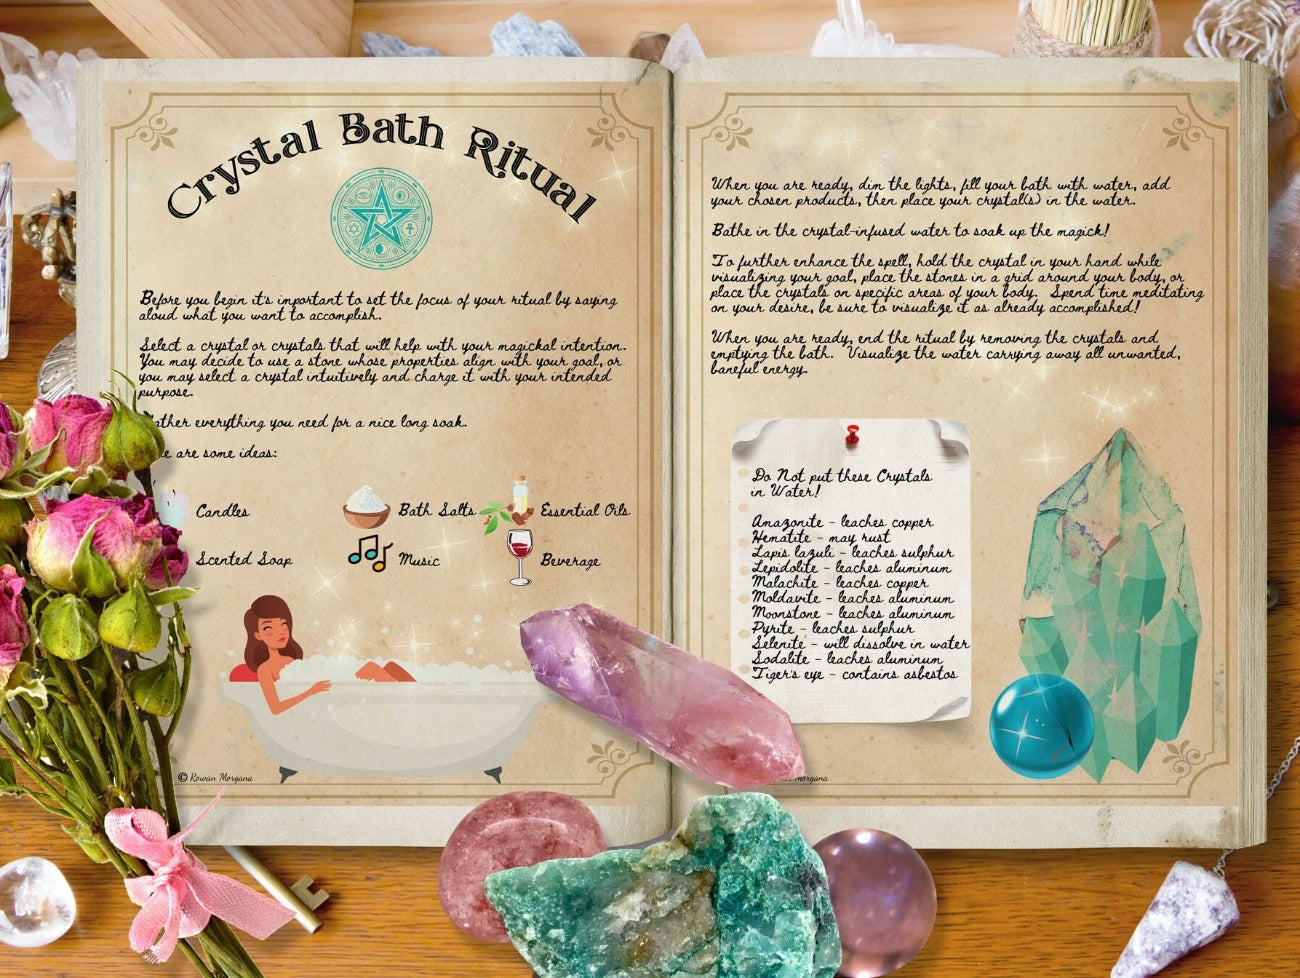 Crystal Bath Ritual is displayed in an open Book of Shadows with crystals and roses placed on and around it.